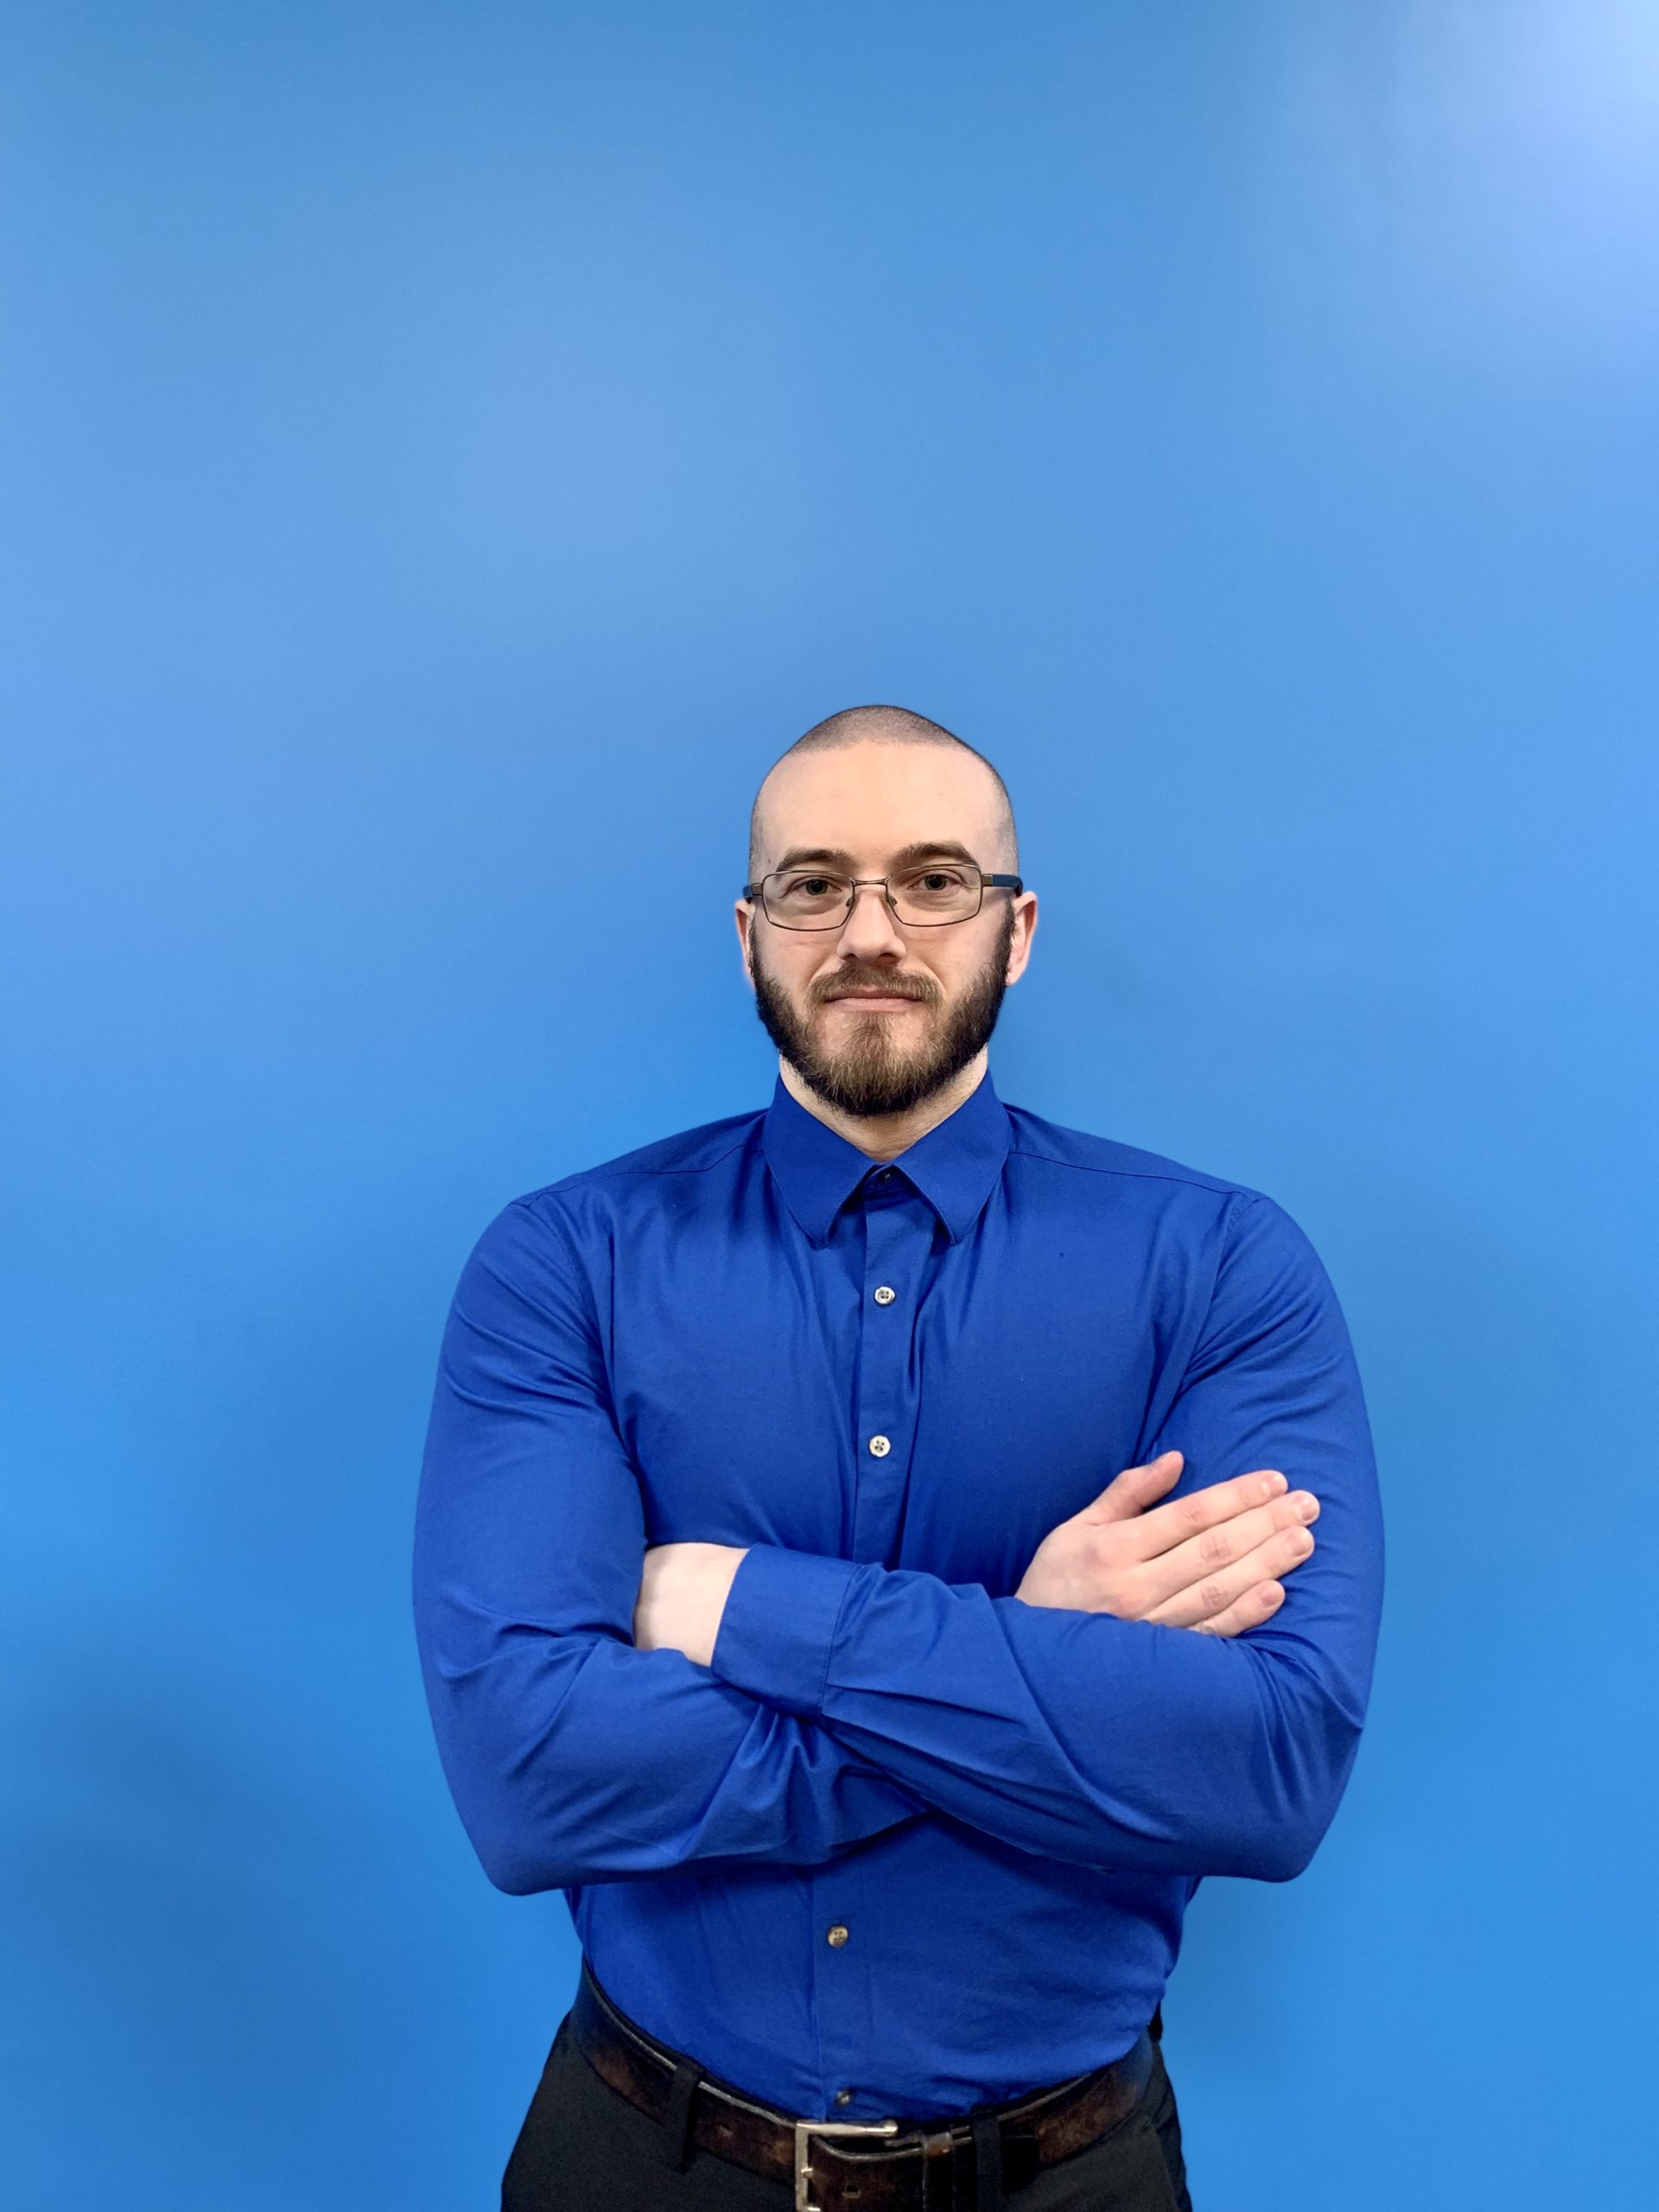 Alexander Panas club manager at Fitness Connection - man standing in front of a blue background